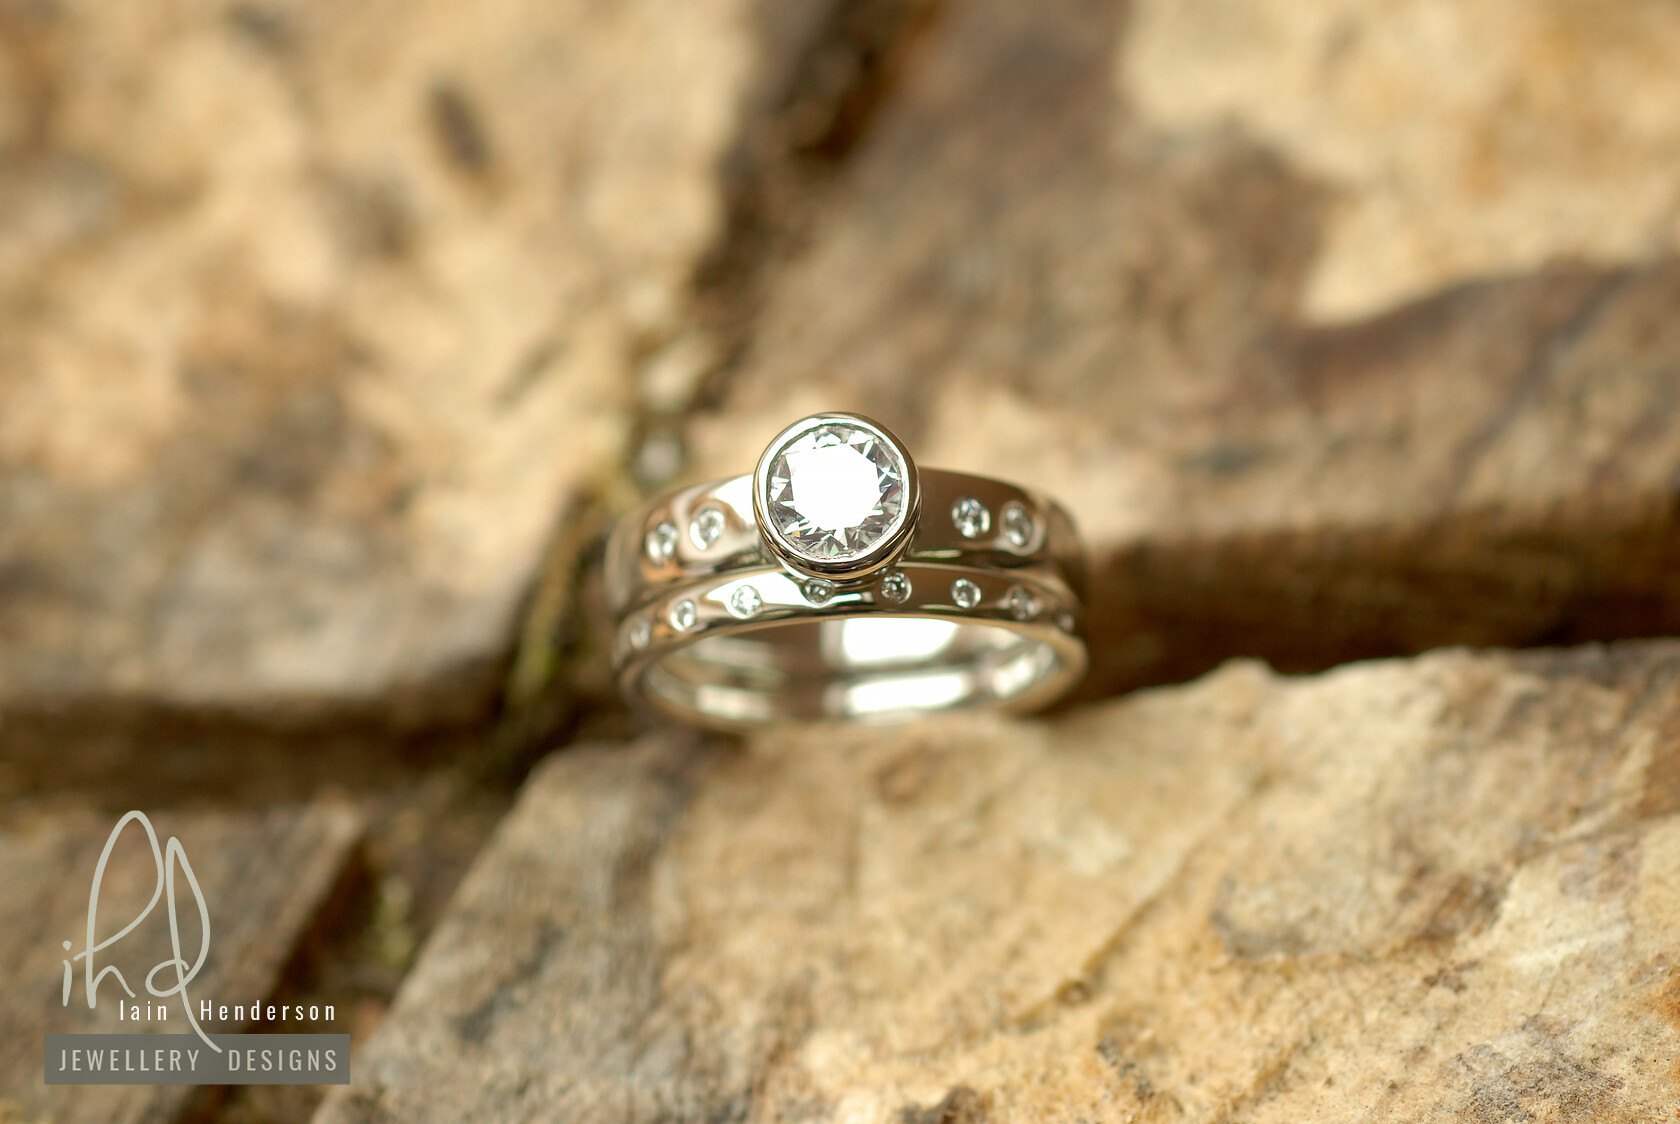 Engagement and wedding ring set with small white diamonds on both bands